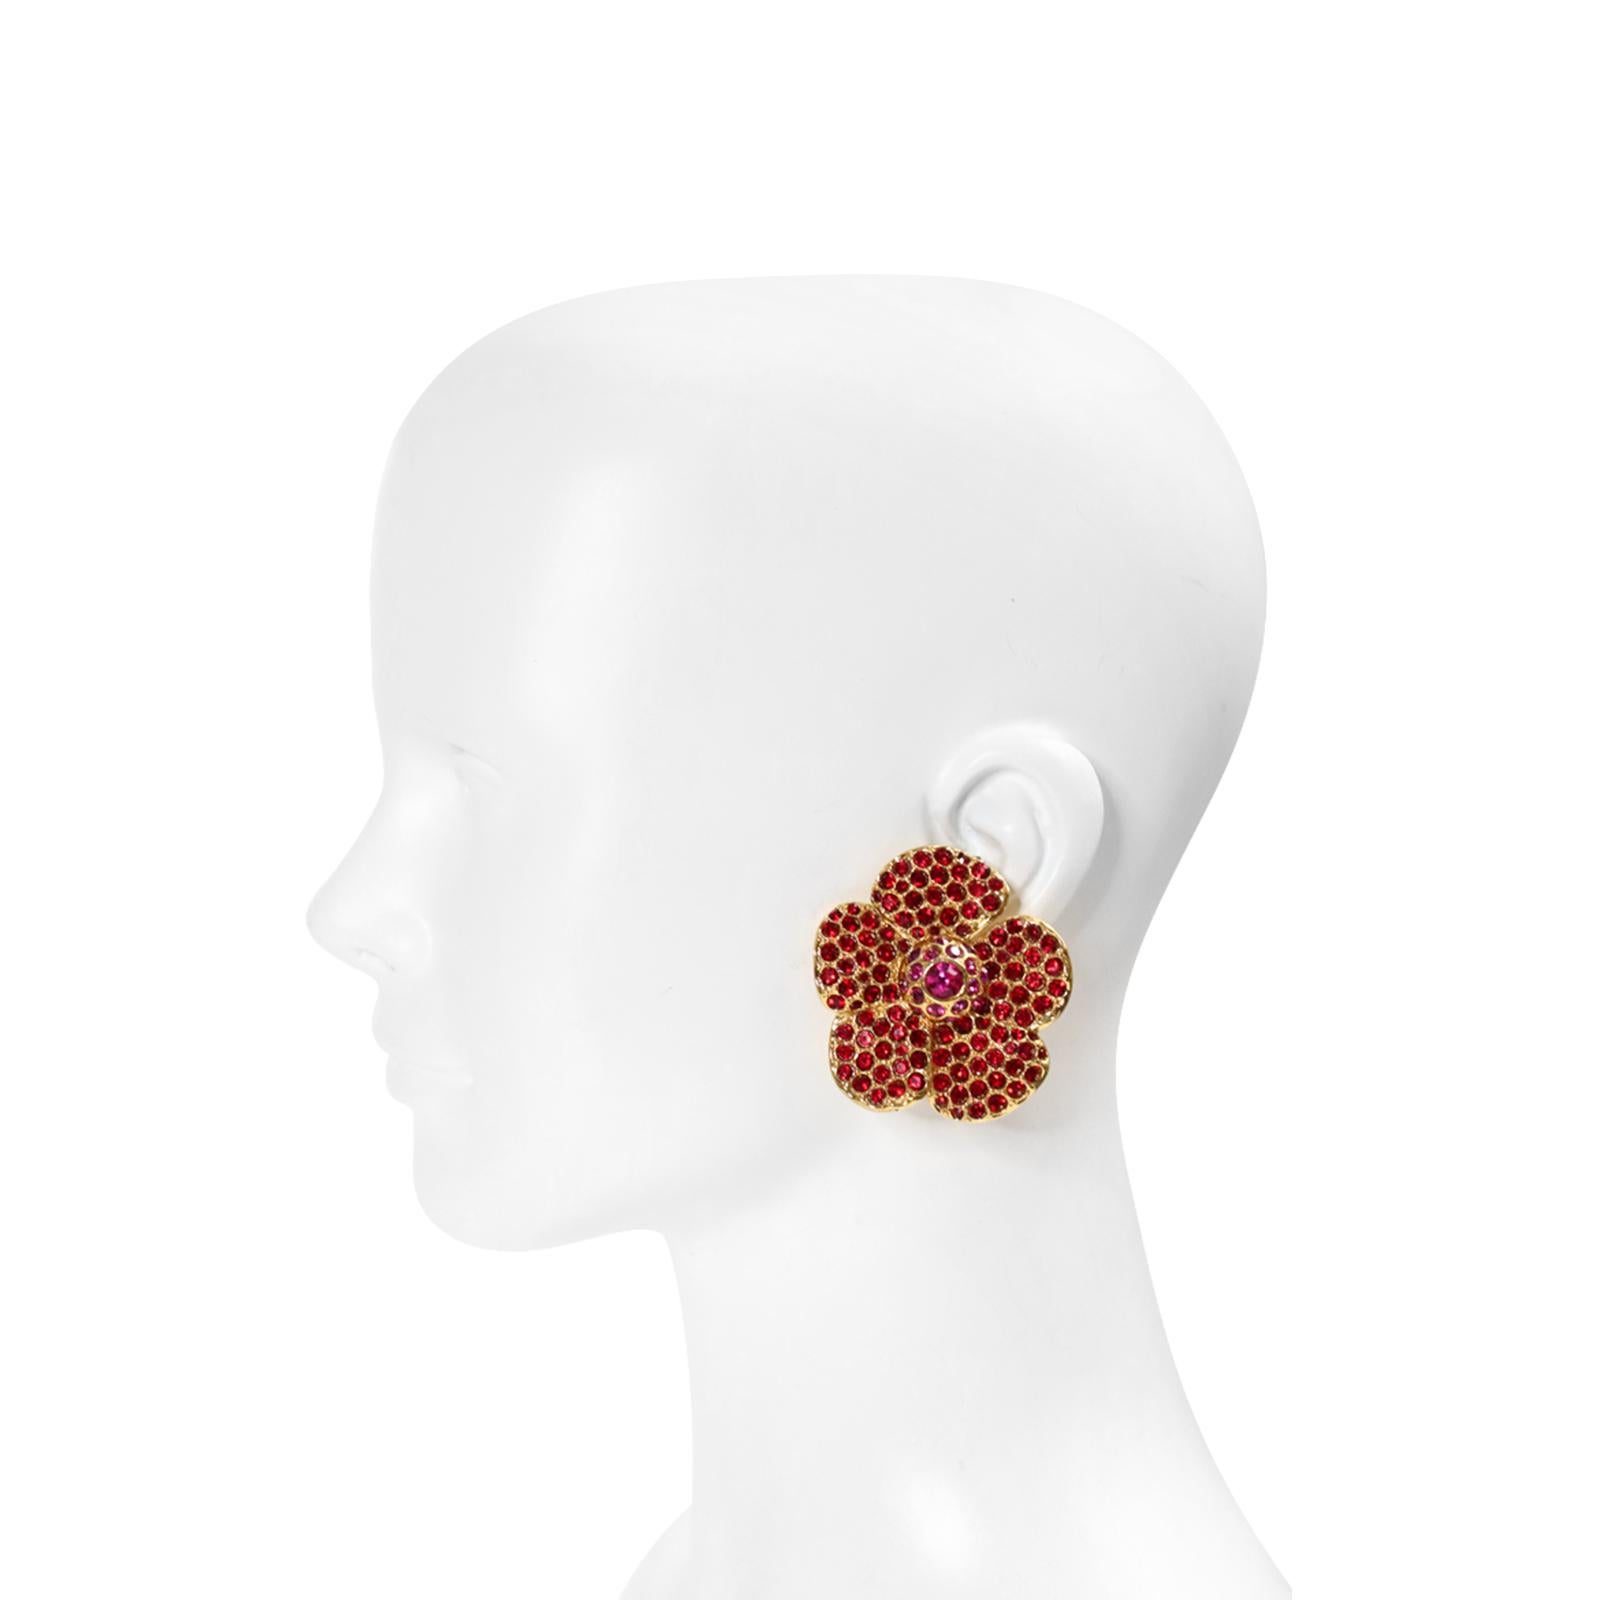 Vintage Yves Saint Laurent YSL Pink and Red Flower Earrings Circa 1980's  These are flower earrings set in gold tone with red crystals and then the small disc in the middle is the one with the pink crystal and is surrounded with pink crystals.  When